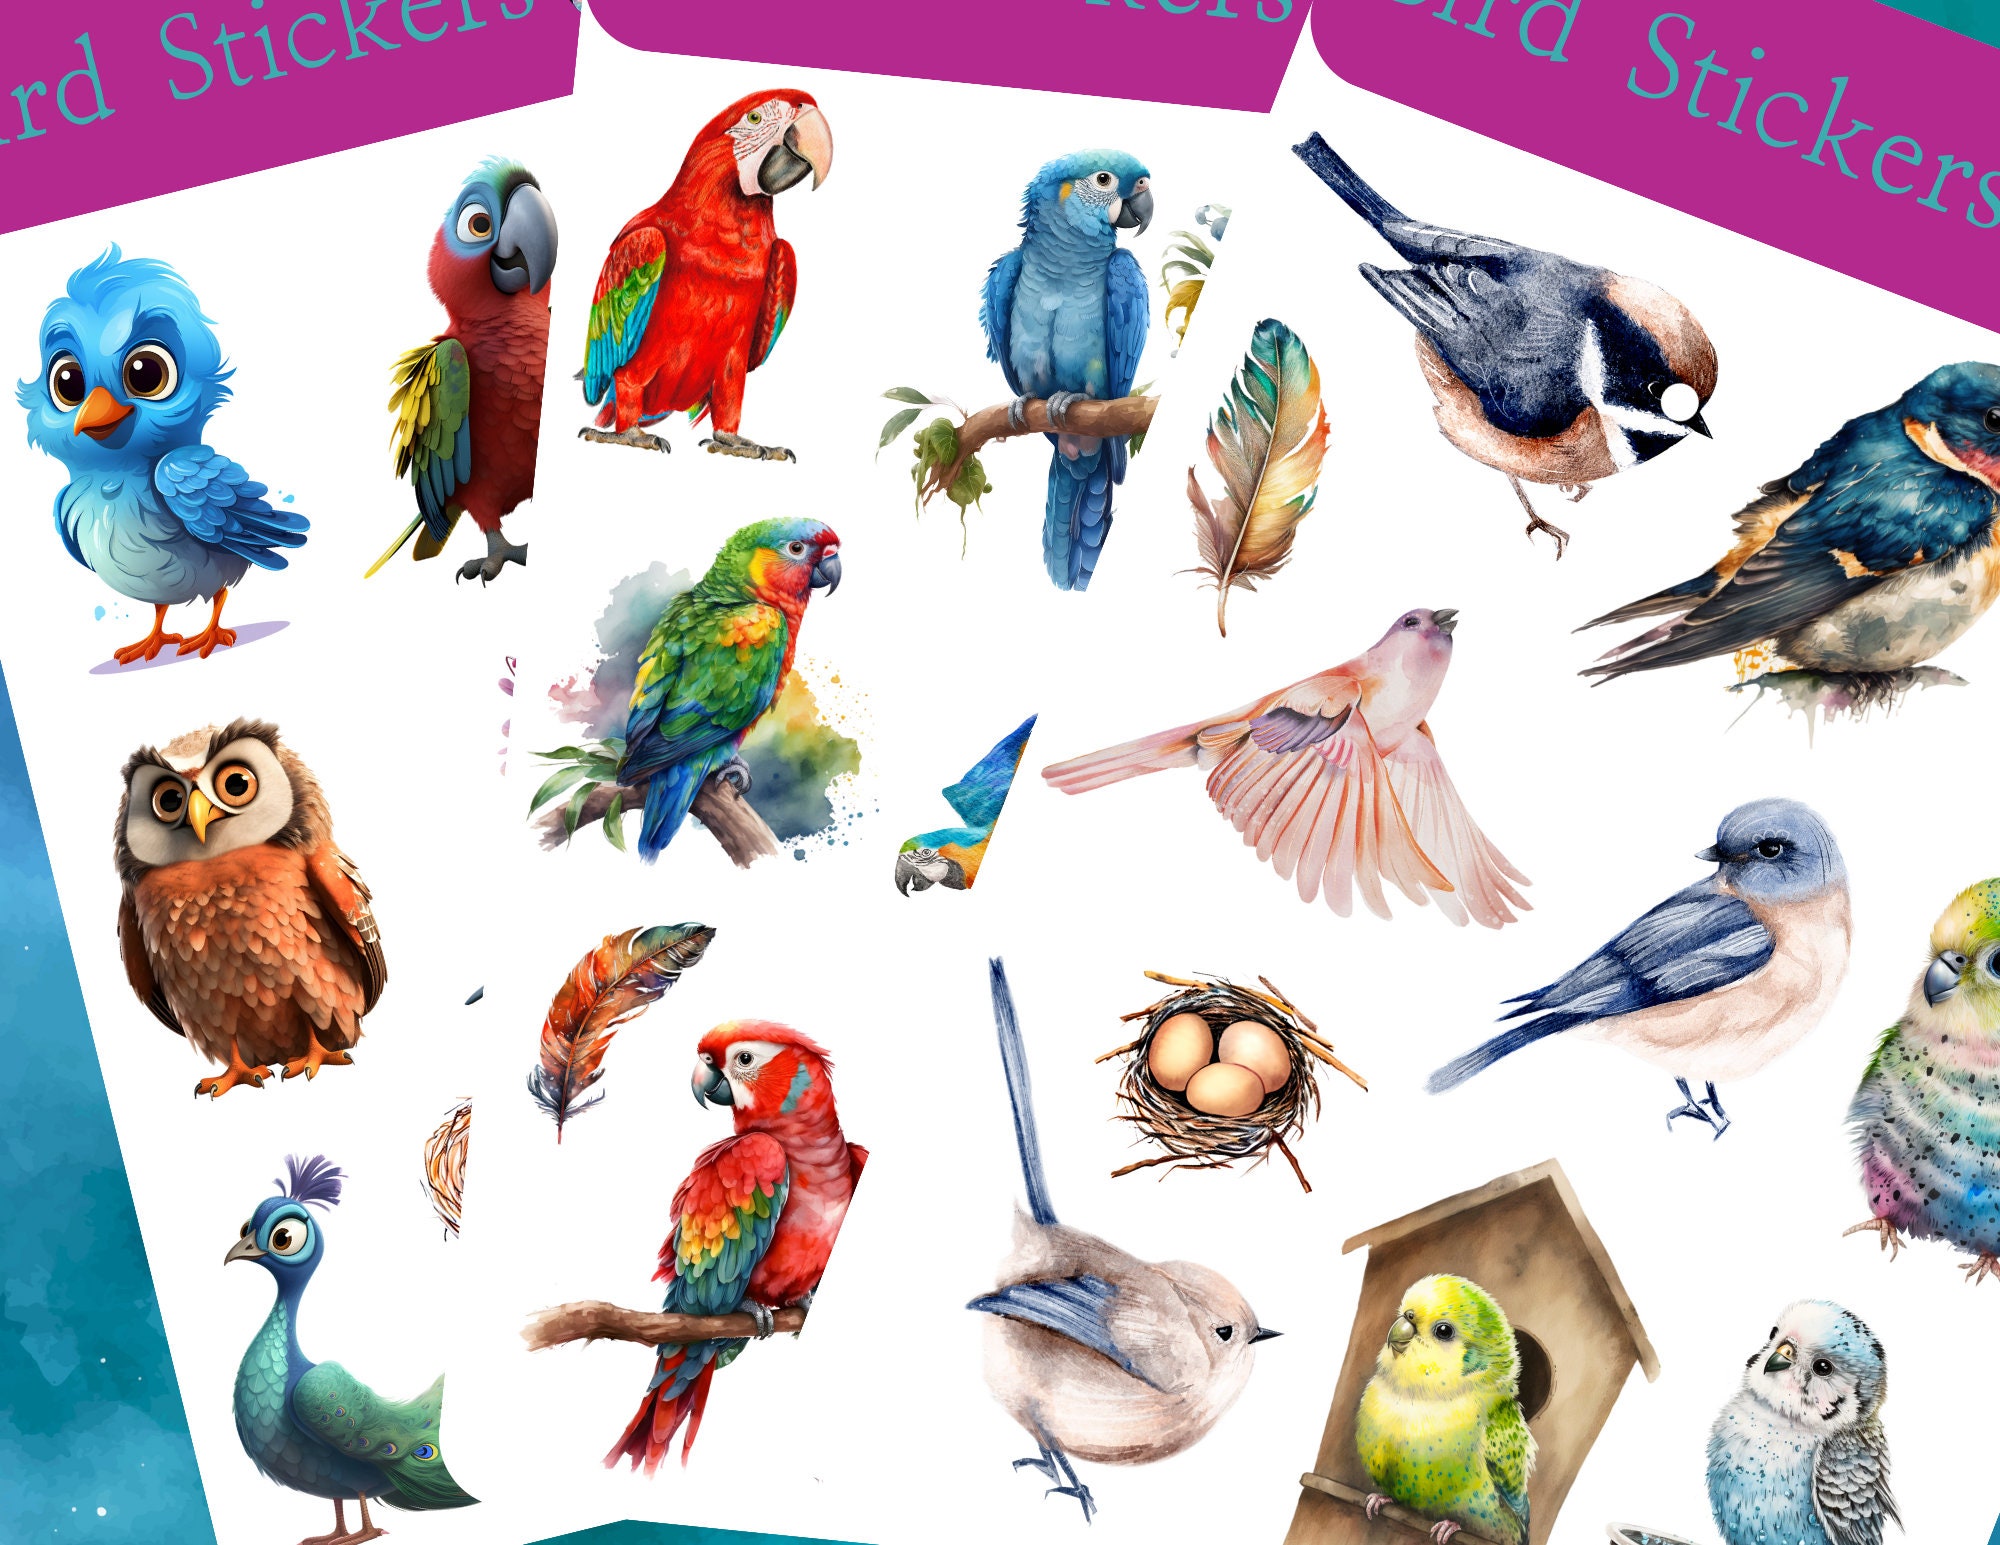 3D Bird Foam Stickers for Kids Crafts,Self Adhesive Puffy Tropical Bird  Stickers for Scrapbook,Party Favors,Laptops,Including Hummingbird Parrot  Owl